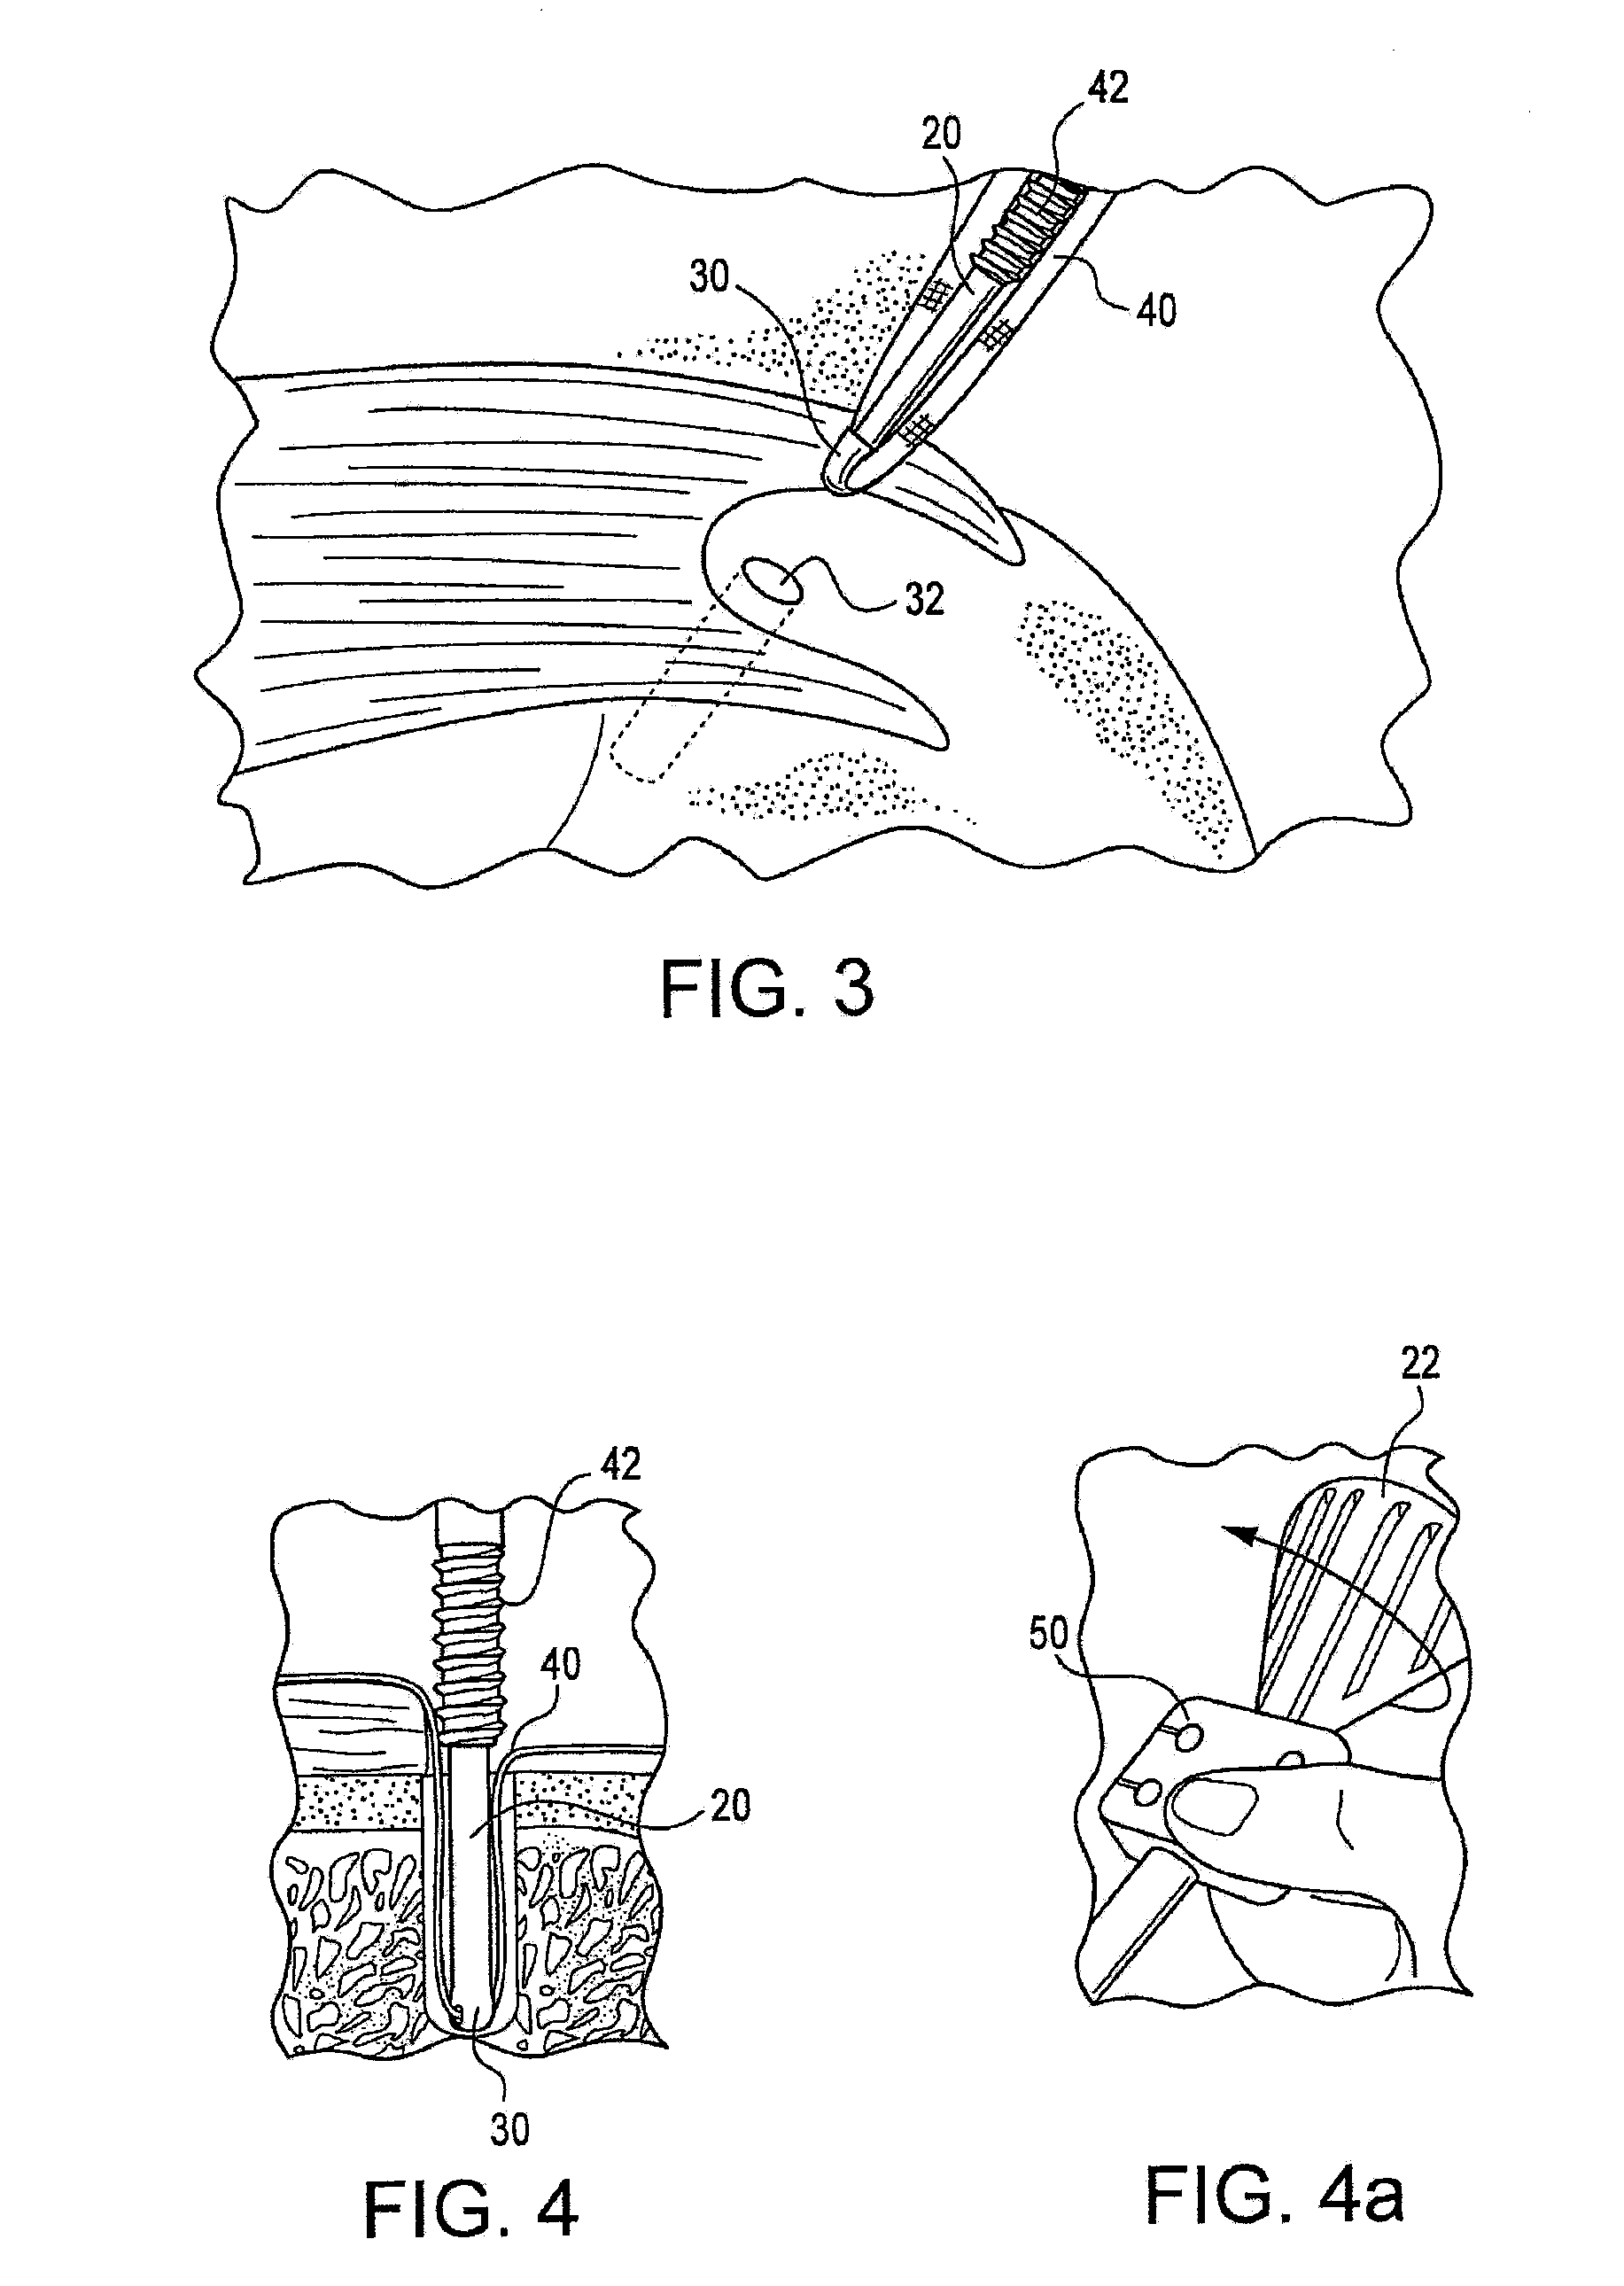 Fenestrated swivel anchor for knotless fixation of tissue